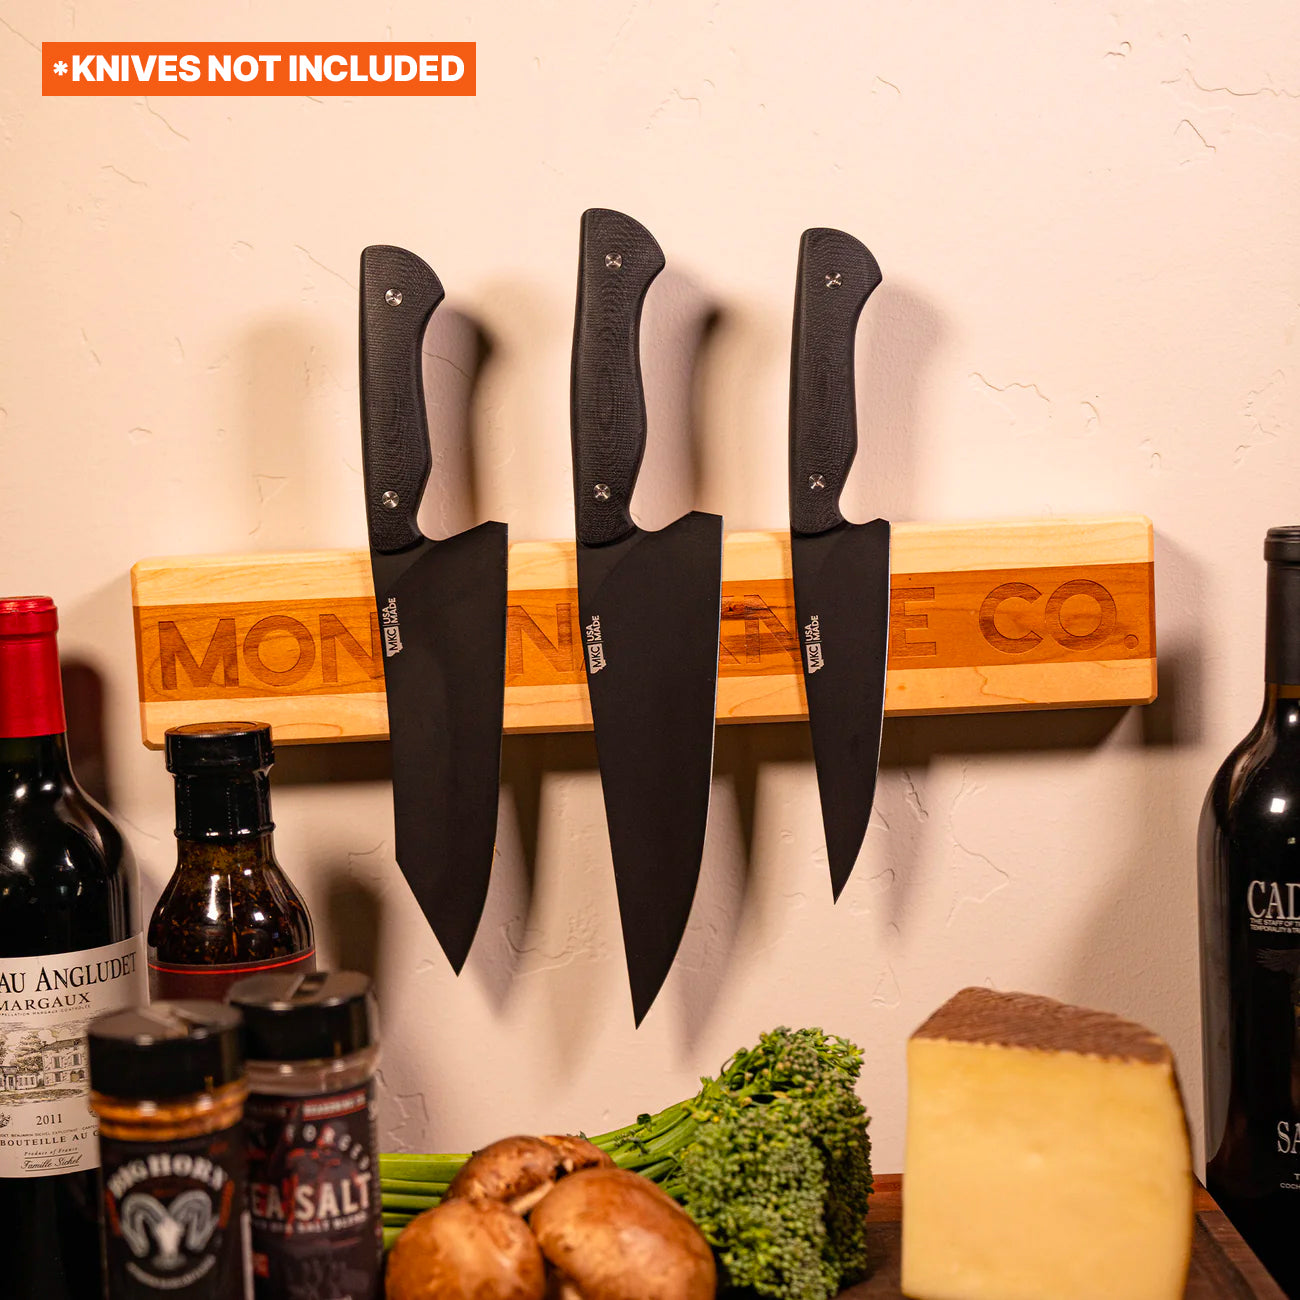 Home Cooking In Montana: Product Review MAC Knives